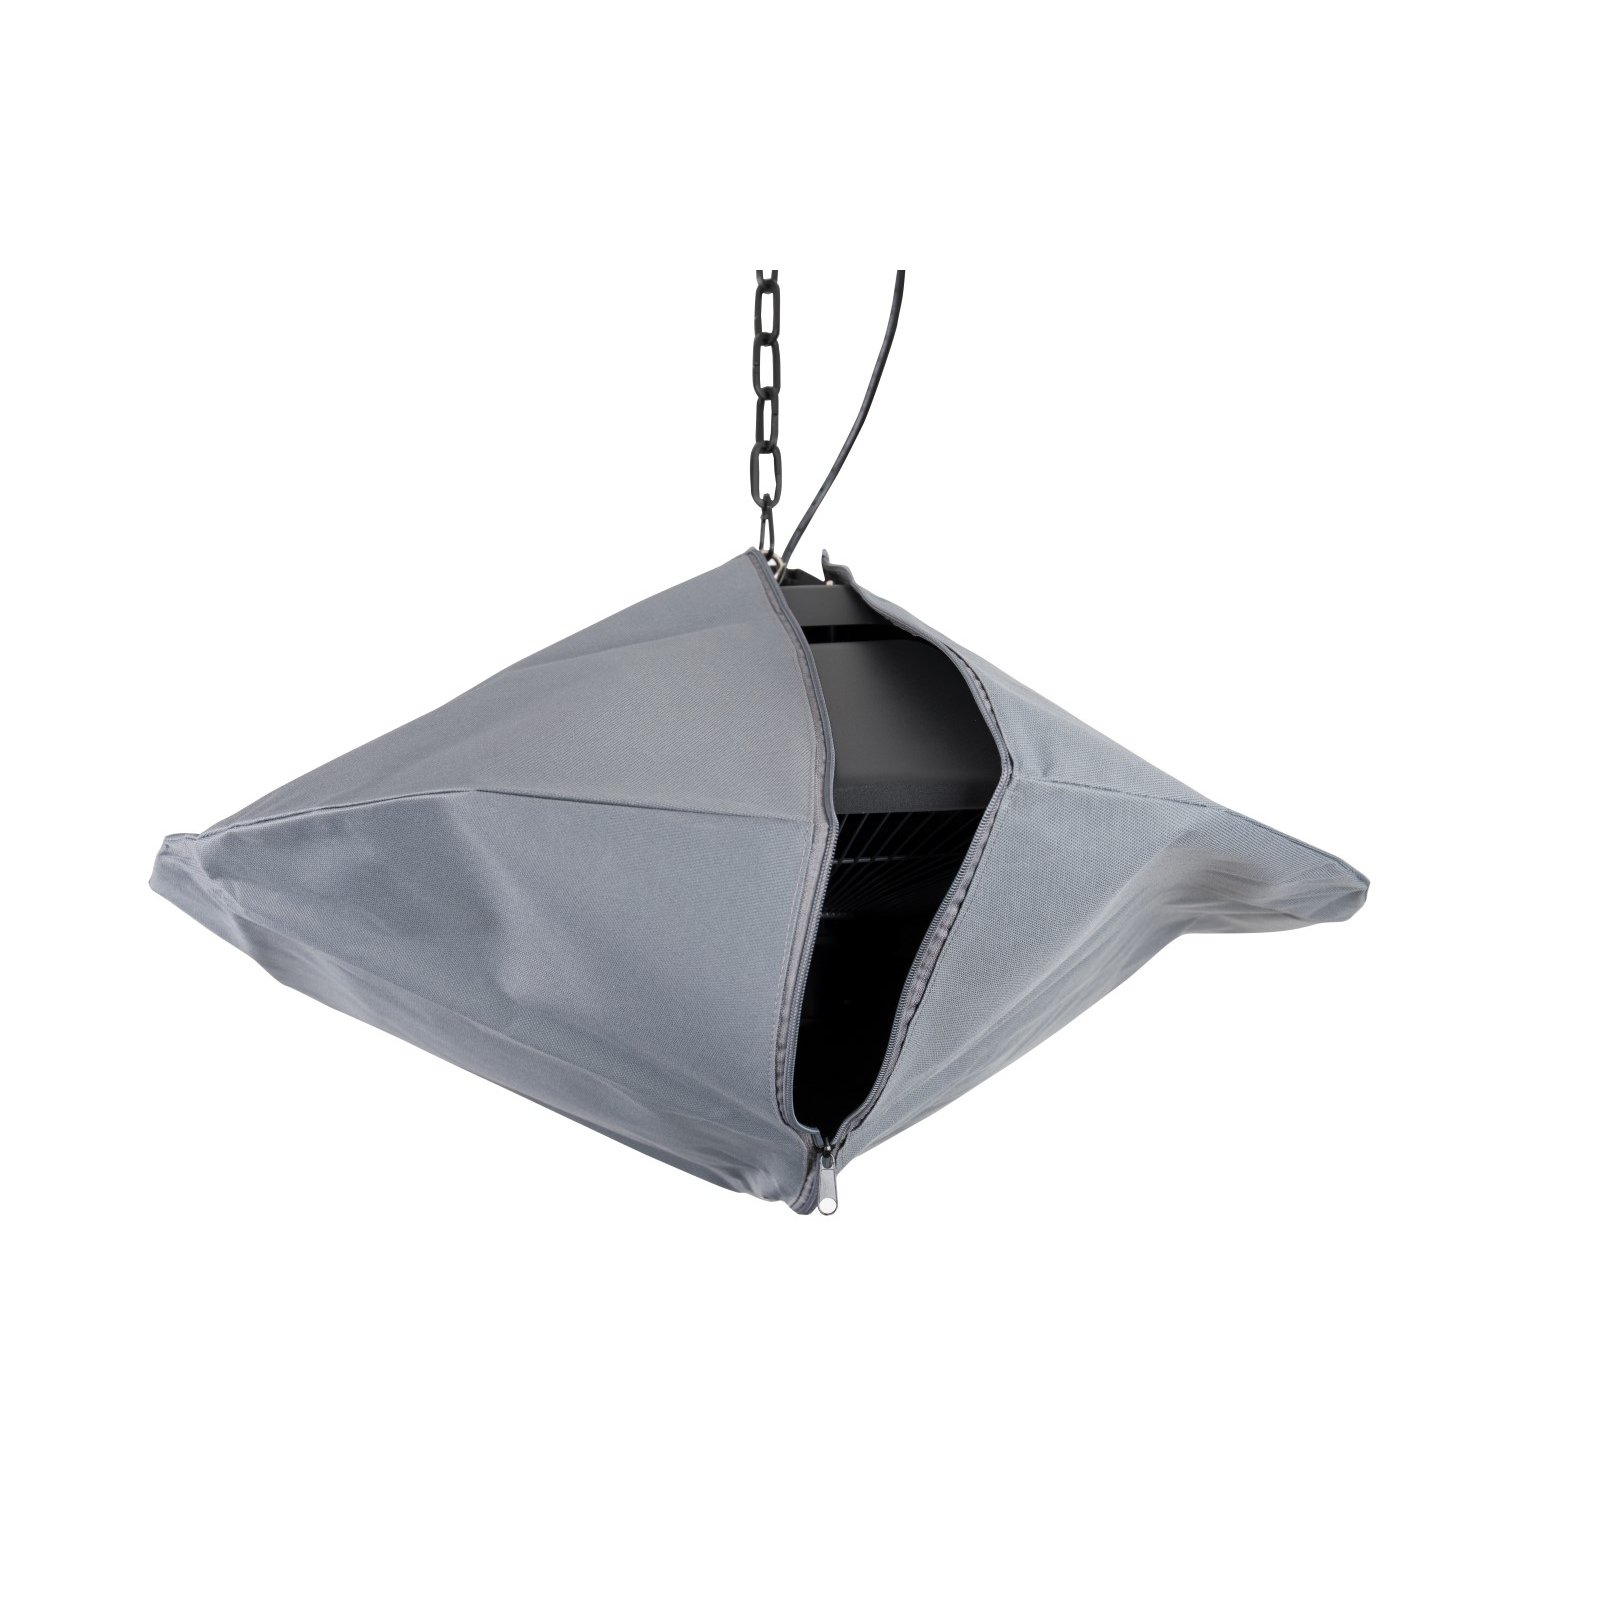 Sunred protective cover Square hanging